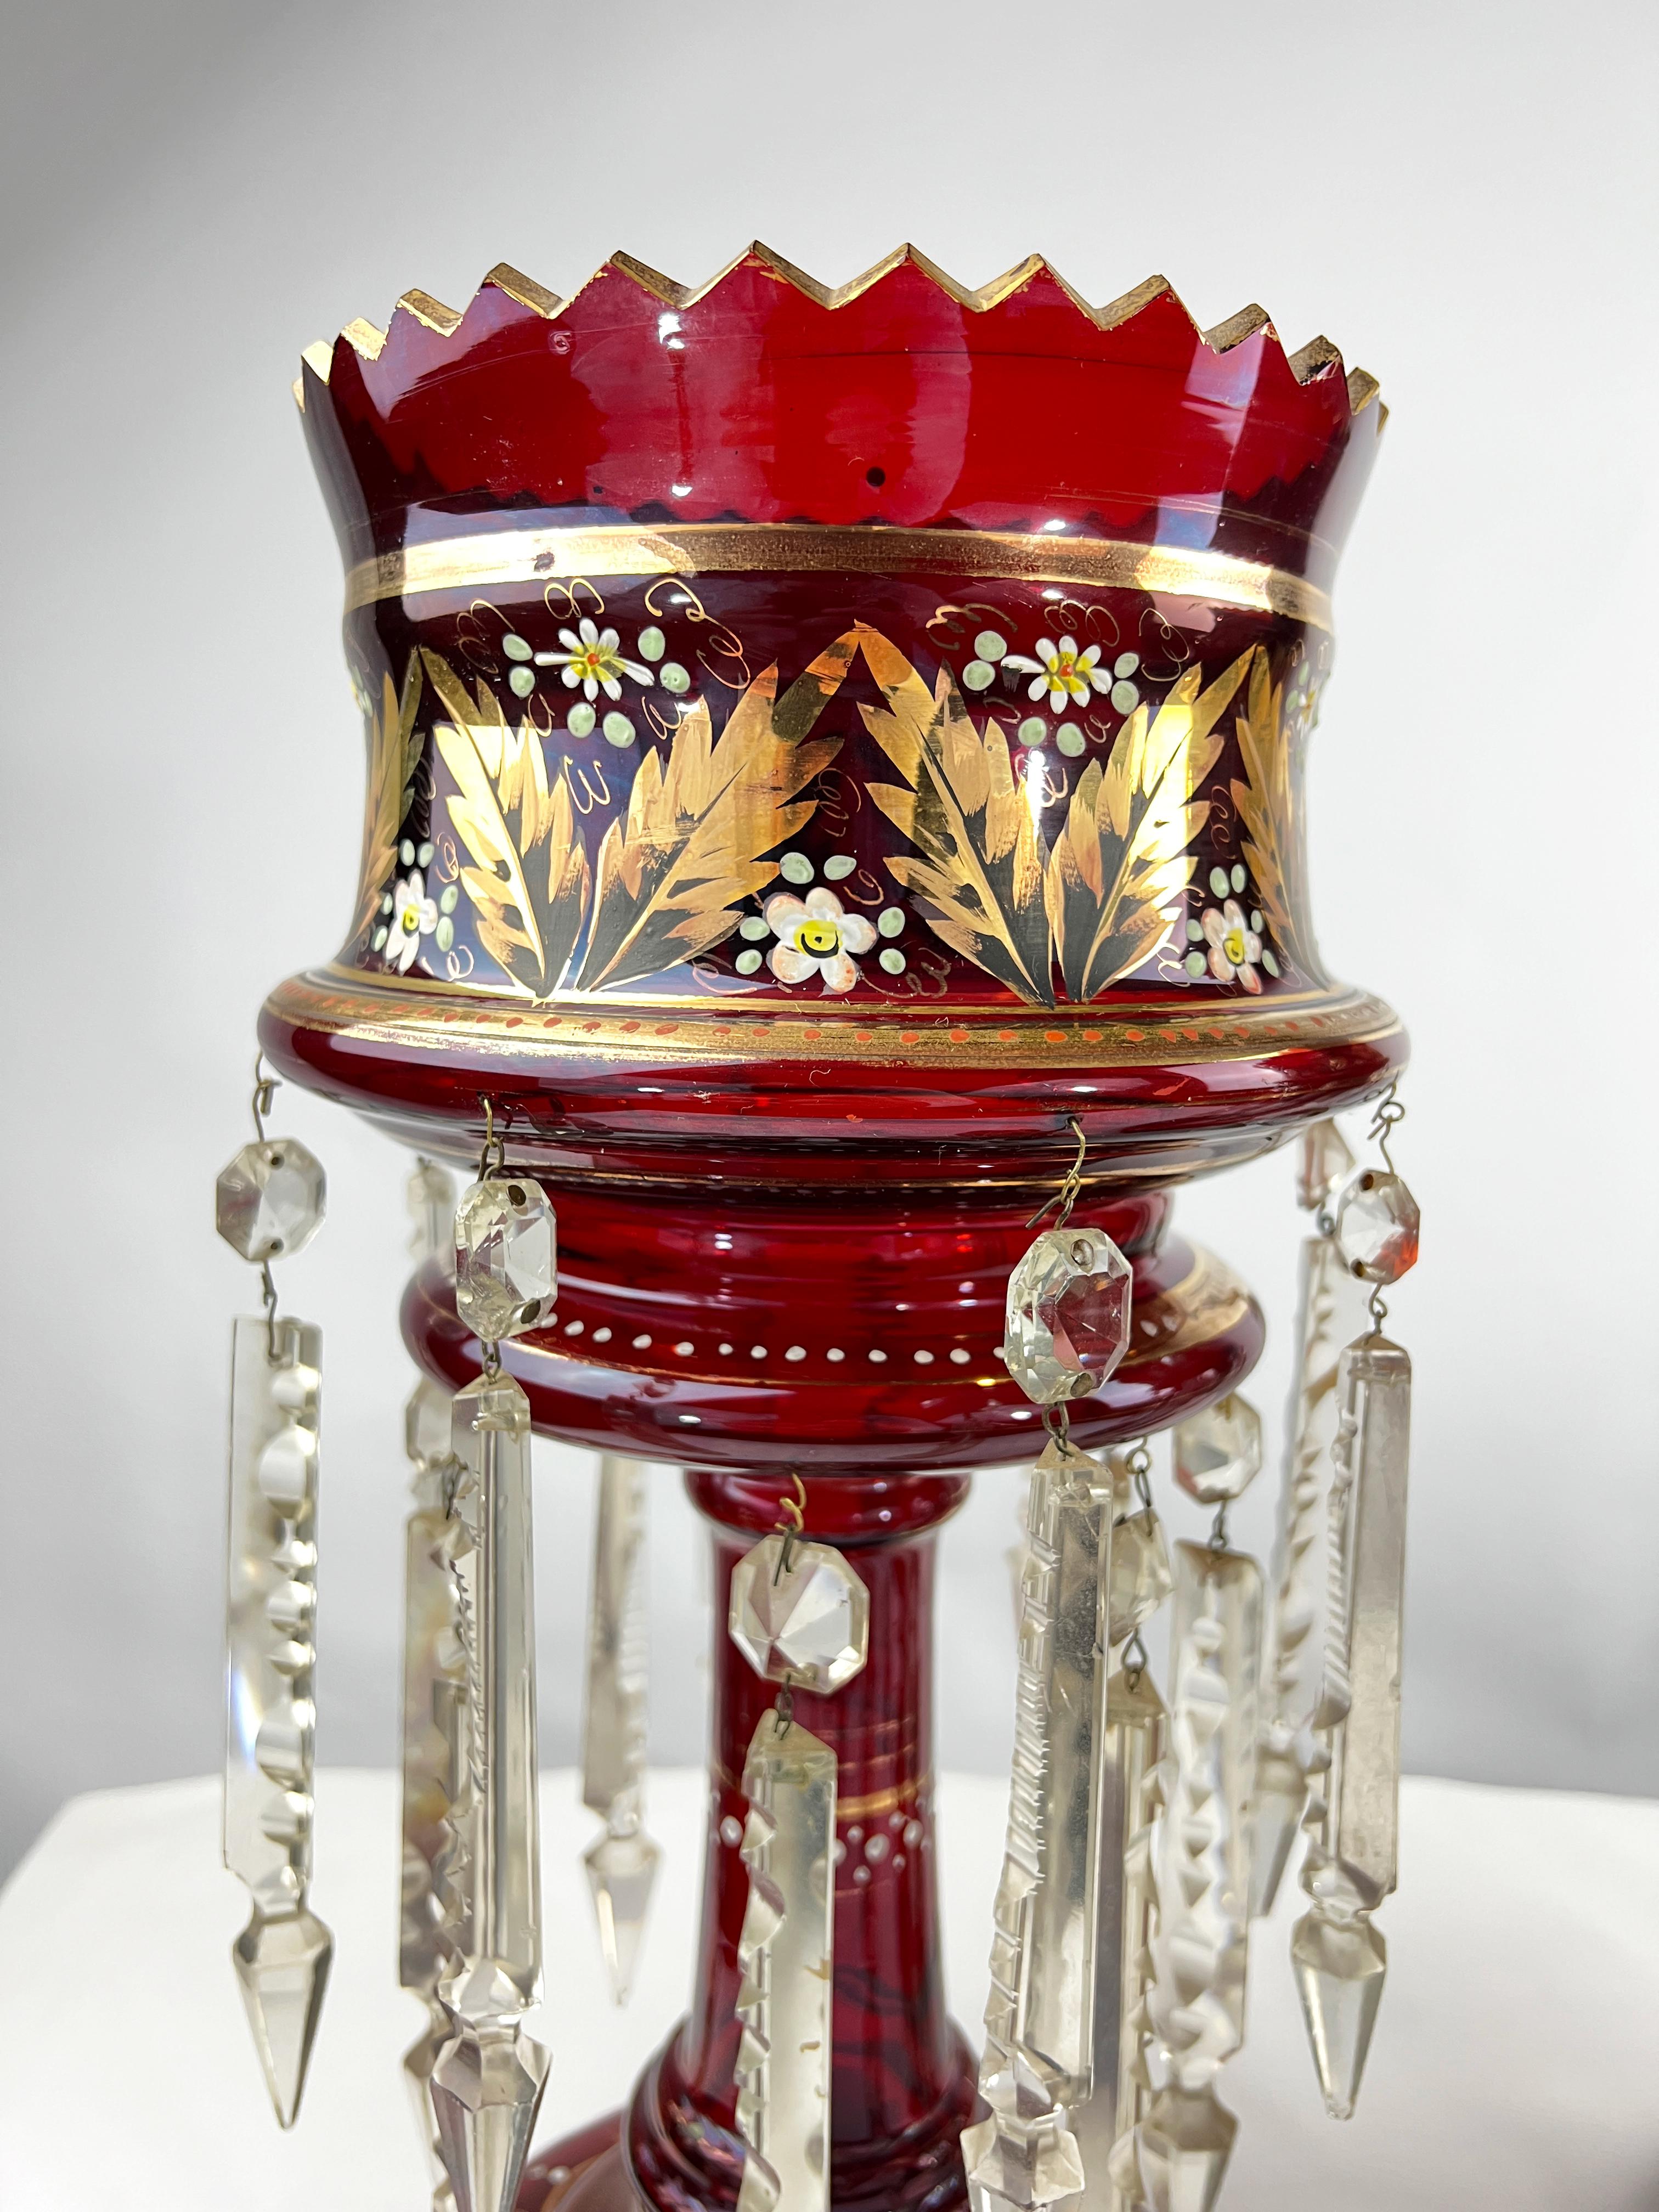 Pair of late 19th century ruby glass Lusters decorated with enamelled flowers and gilded leafs, each with double row of cut glass drops, raised on round bases.
 